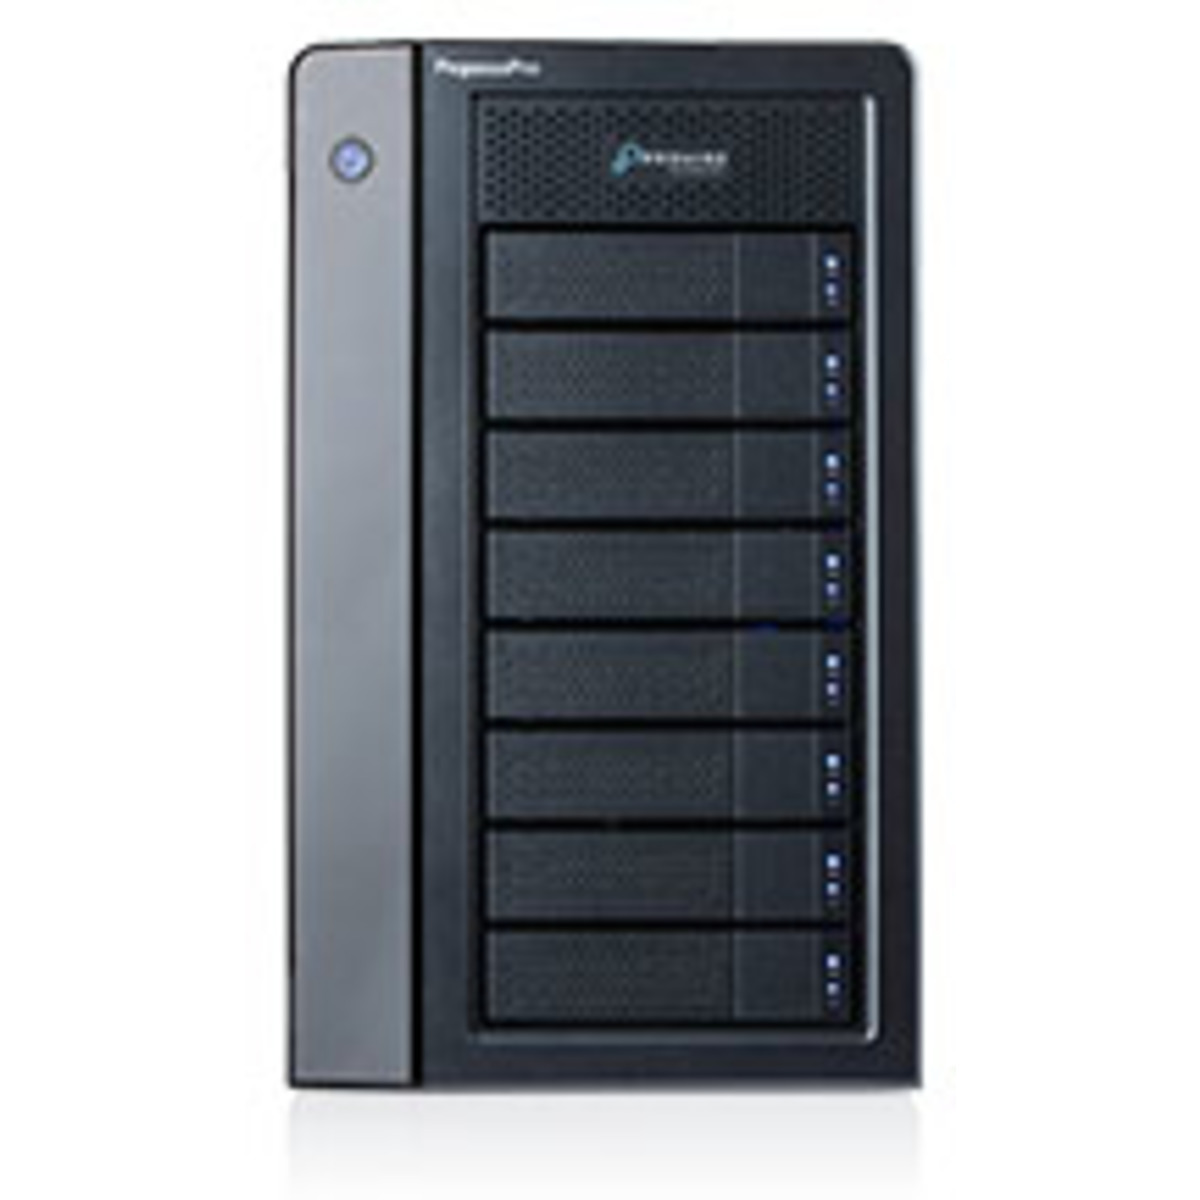 Promise Technology PegasusPro R8 DAS-NAS - Combo Direct + Network Storage Device Burn-In Tested Configurations